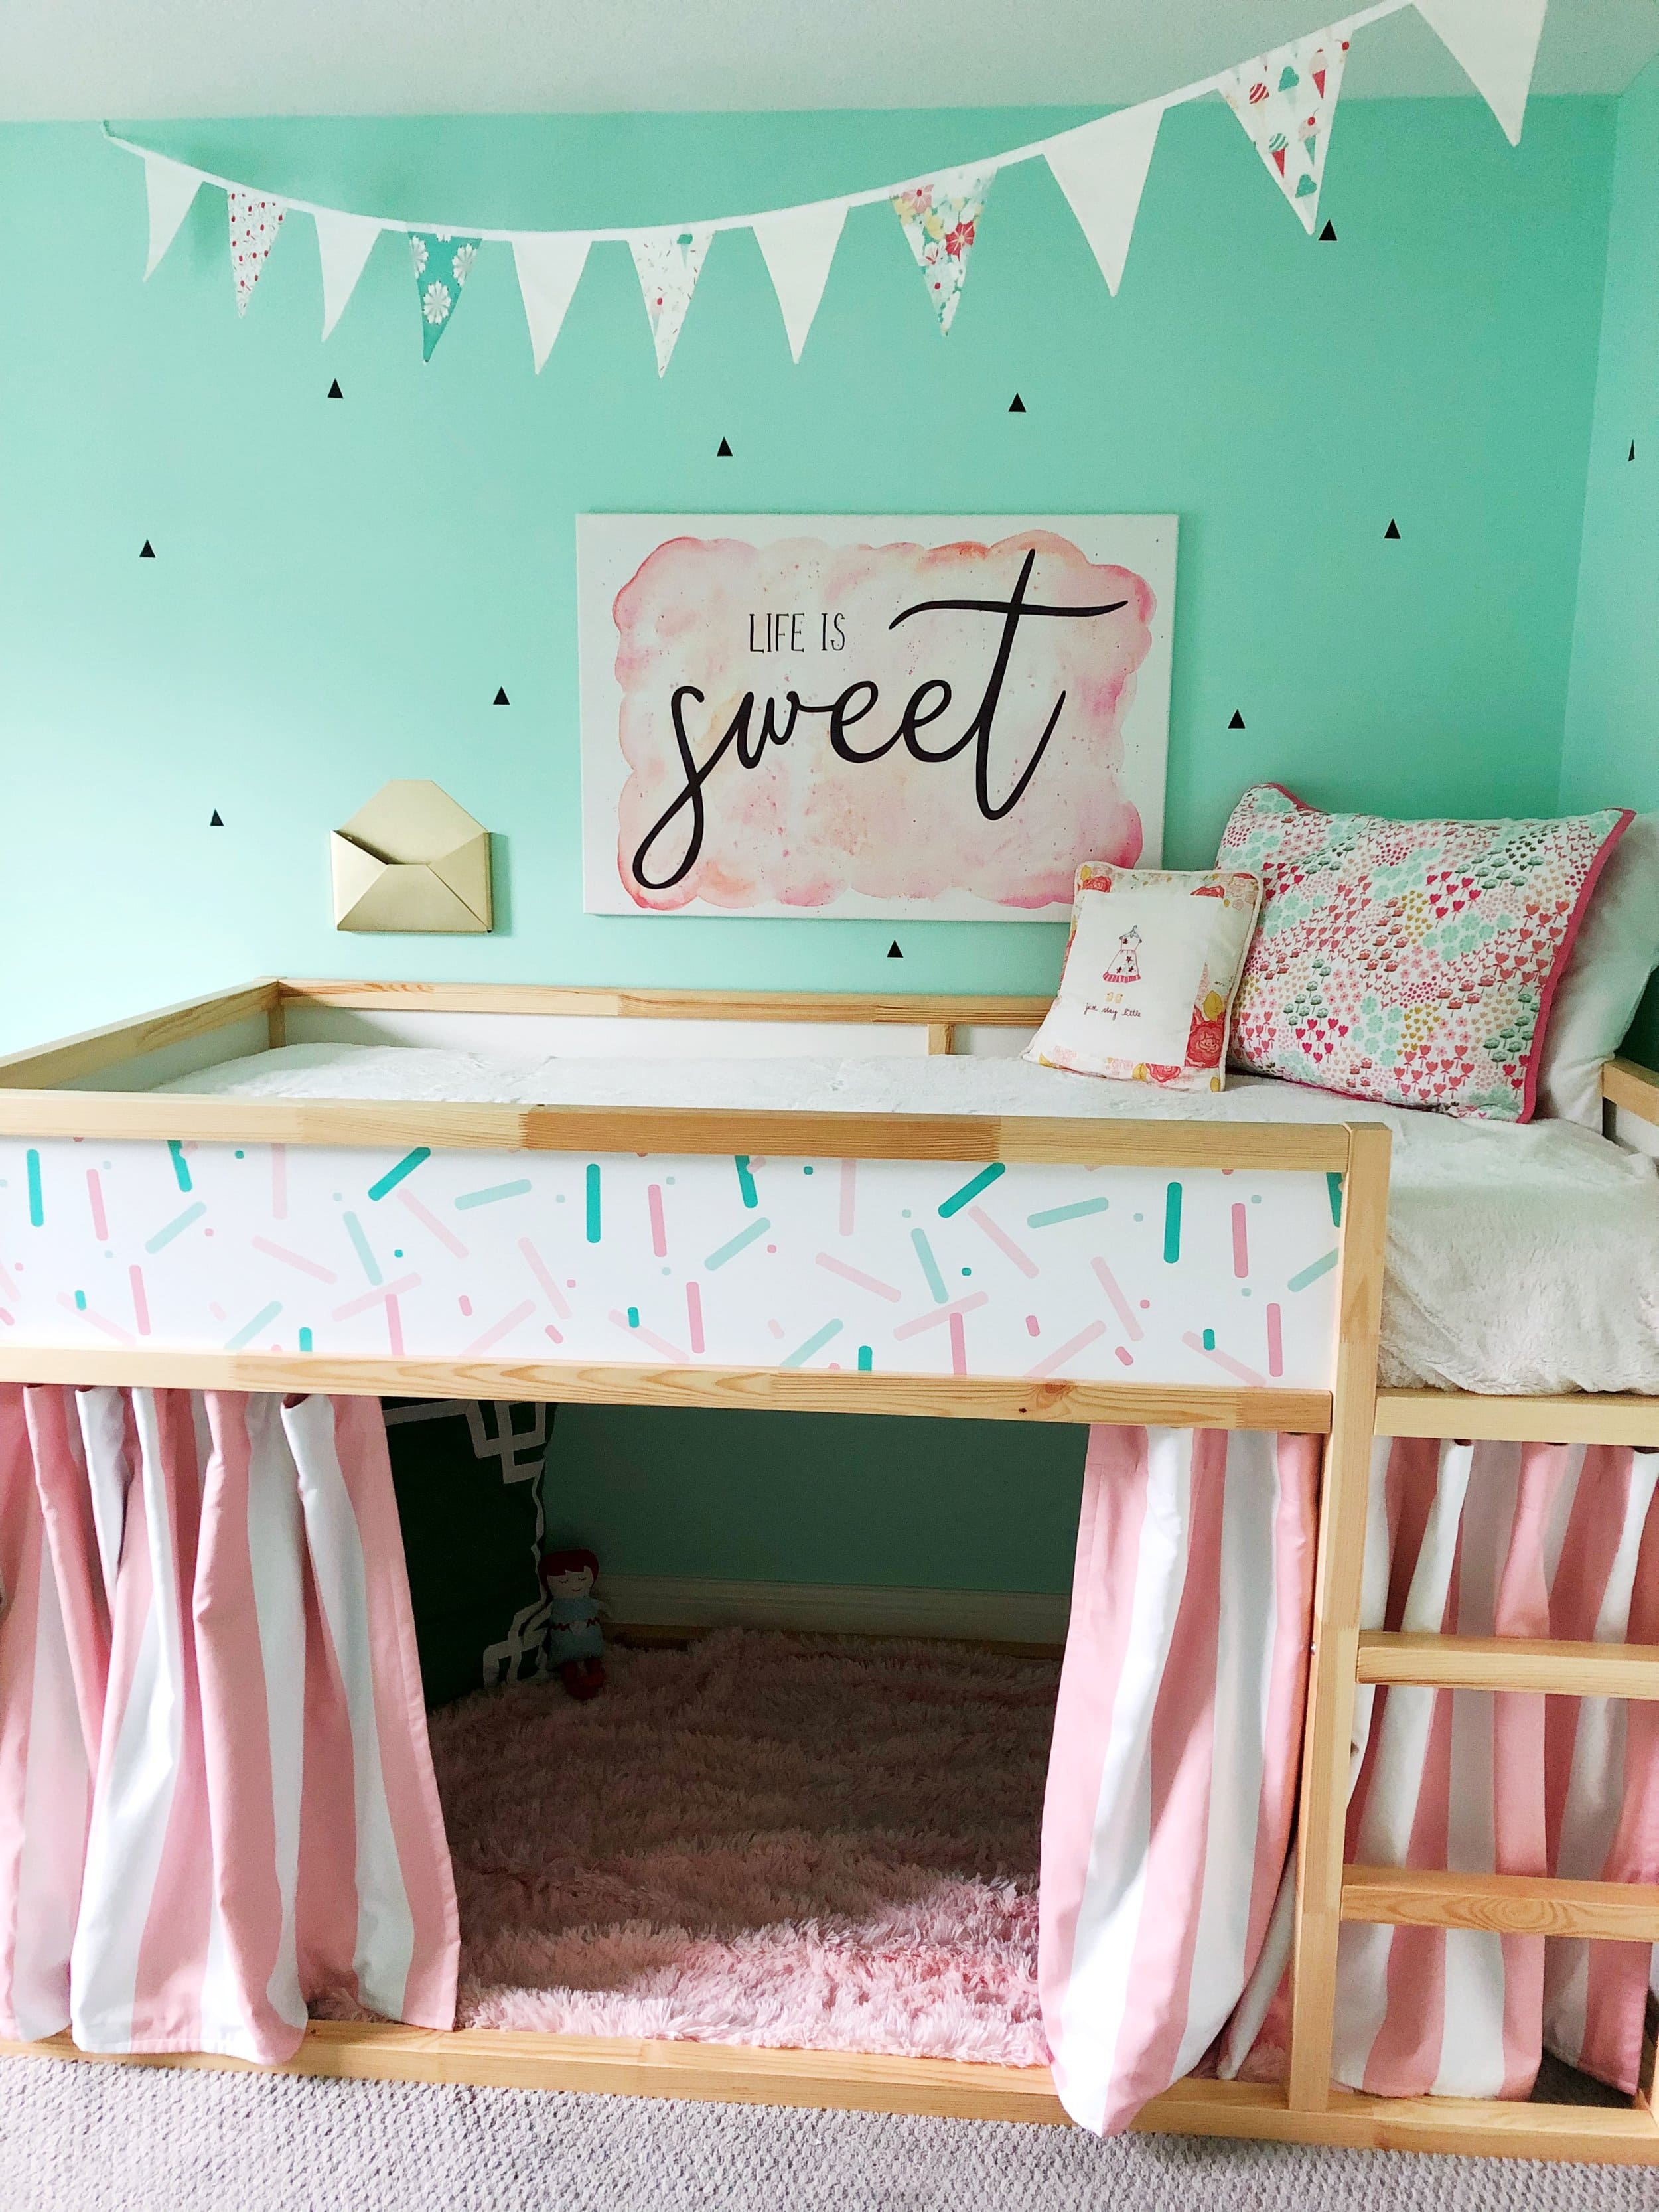 25 Dream - Look Like Bedroom Decorating Ideas For Your Kids - 91